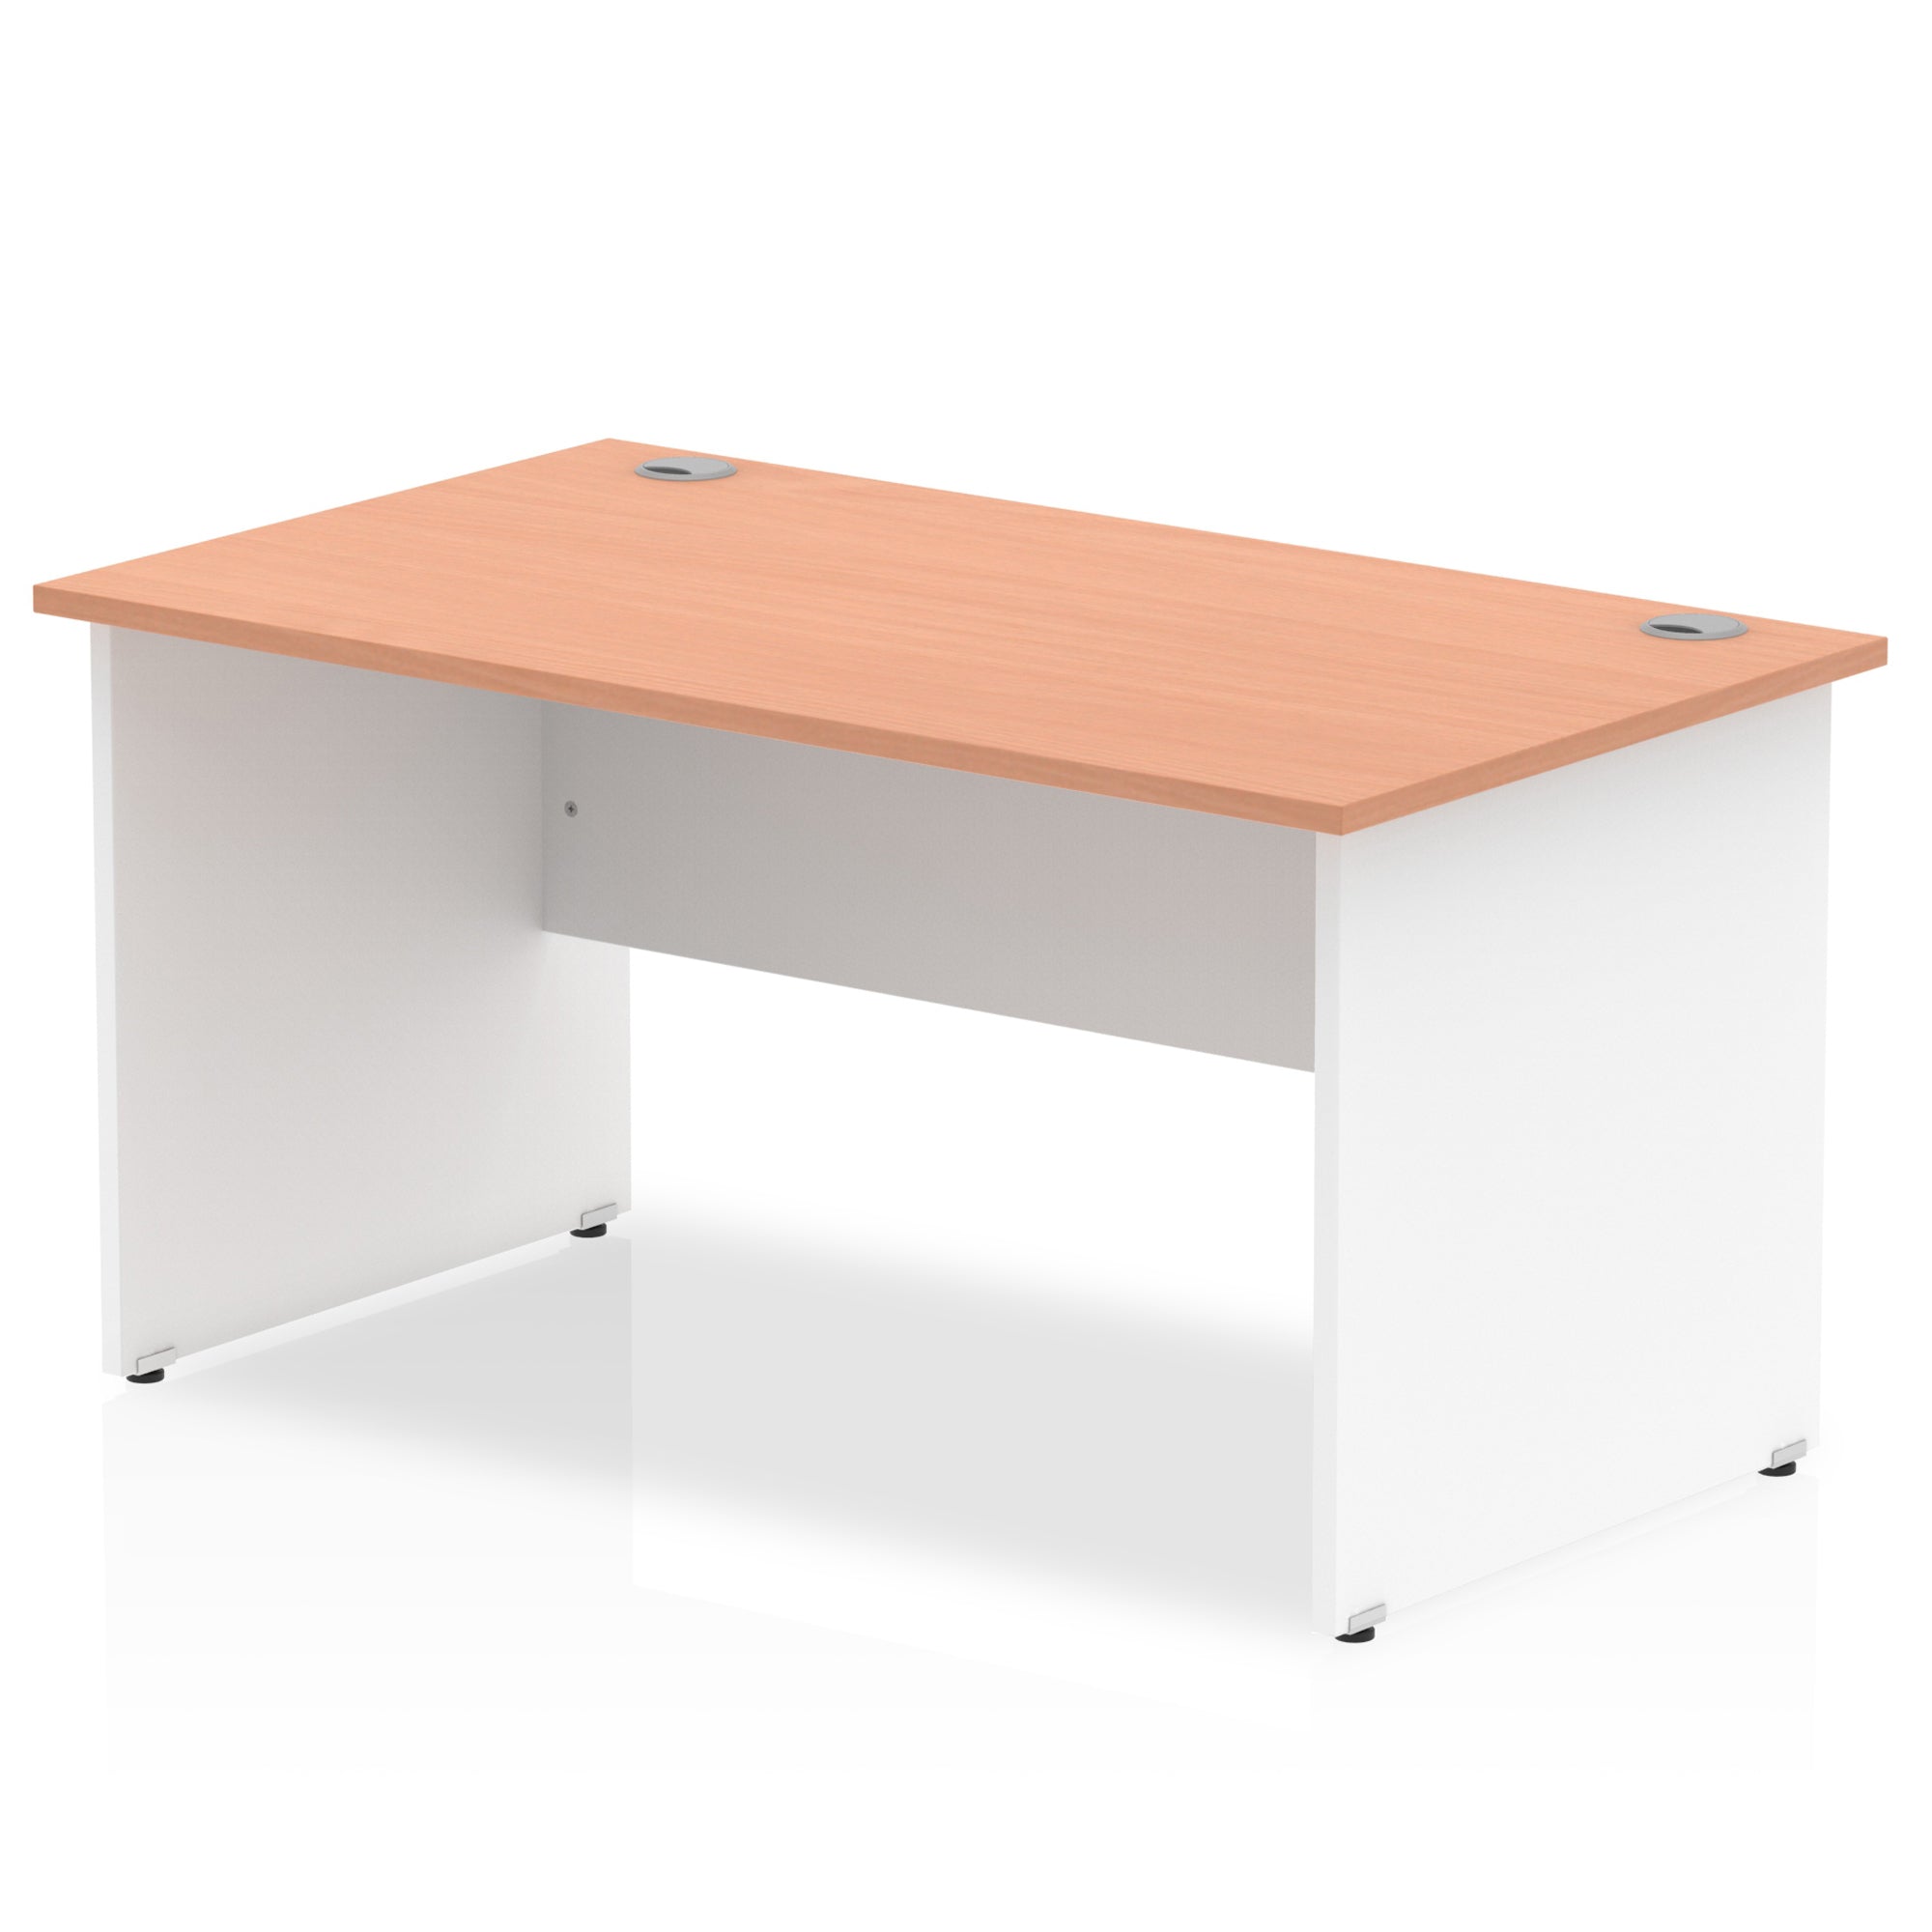 Impulse 1400mm Straight Desk Panel End Leg - Rectangular MFC Table, 1400x800 Top, Self-Assembly, 5-Year Guarantee, White & Matching Frame